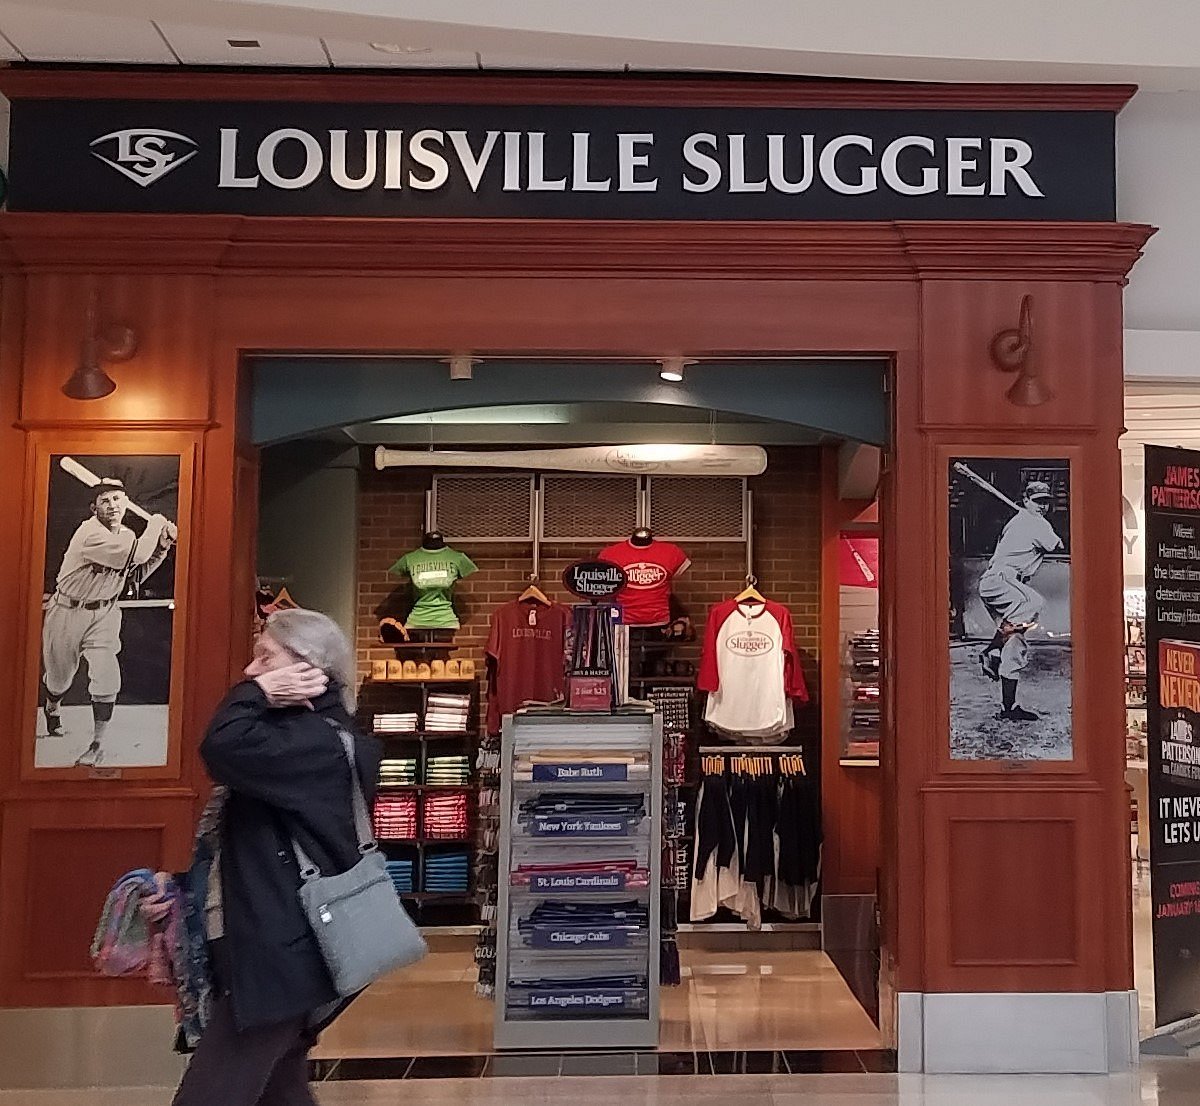 Louisville Slugger Museum & Factory - We're feeling #powerized for the  weekend. How about you? If yes, look the part and check out our throwback  shirts available in the museum store. #SluggerMuseum #